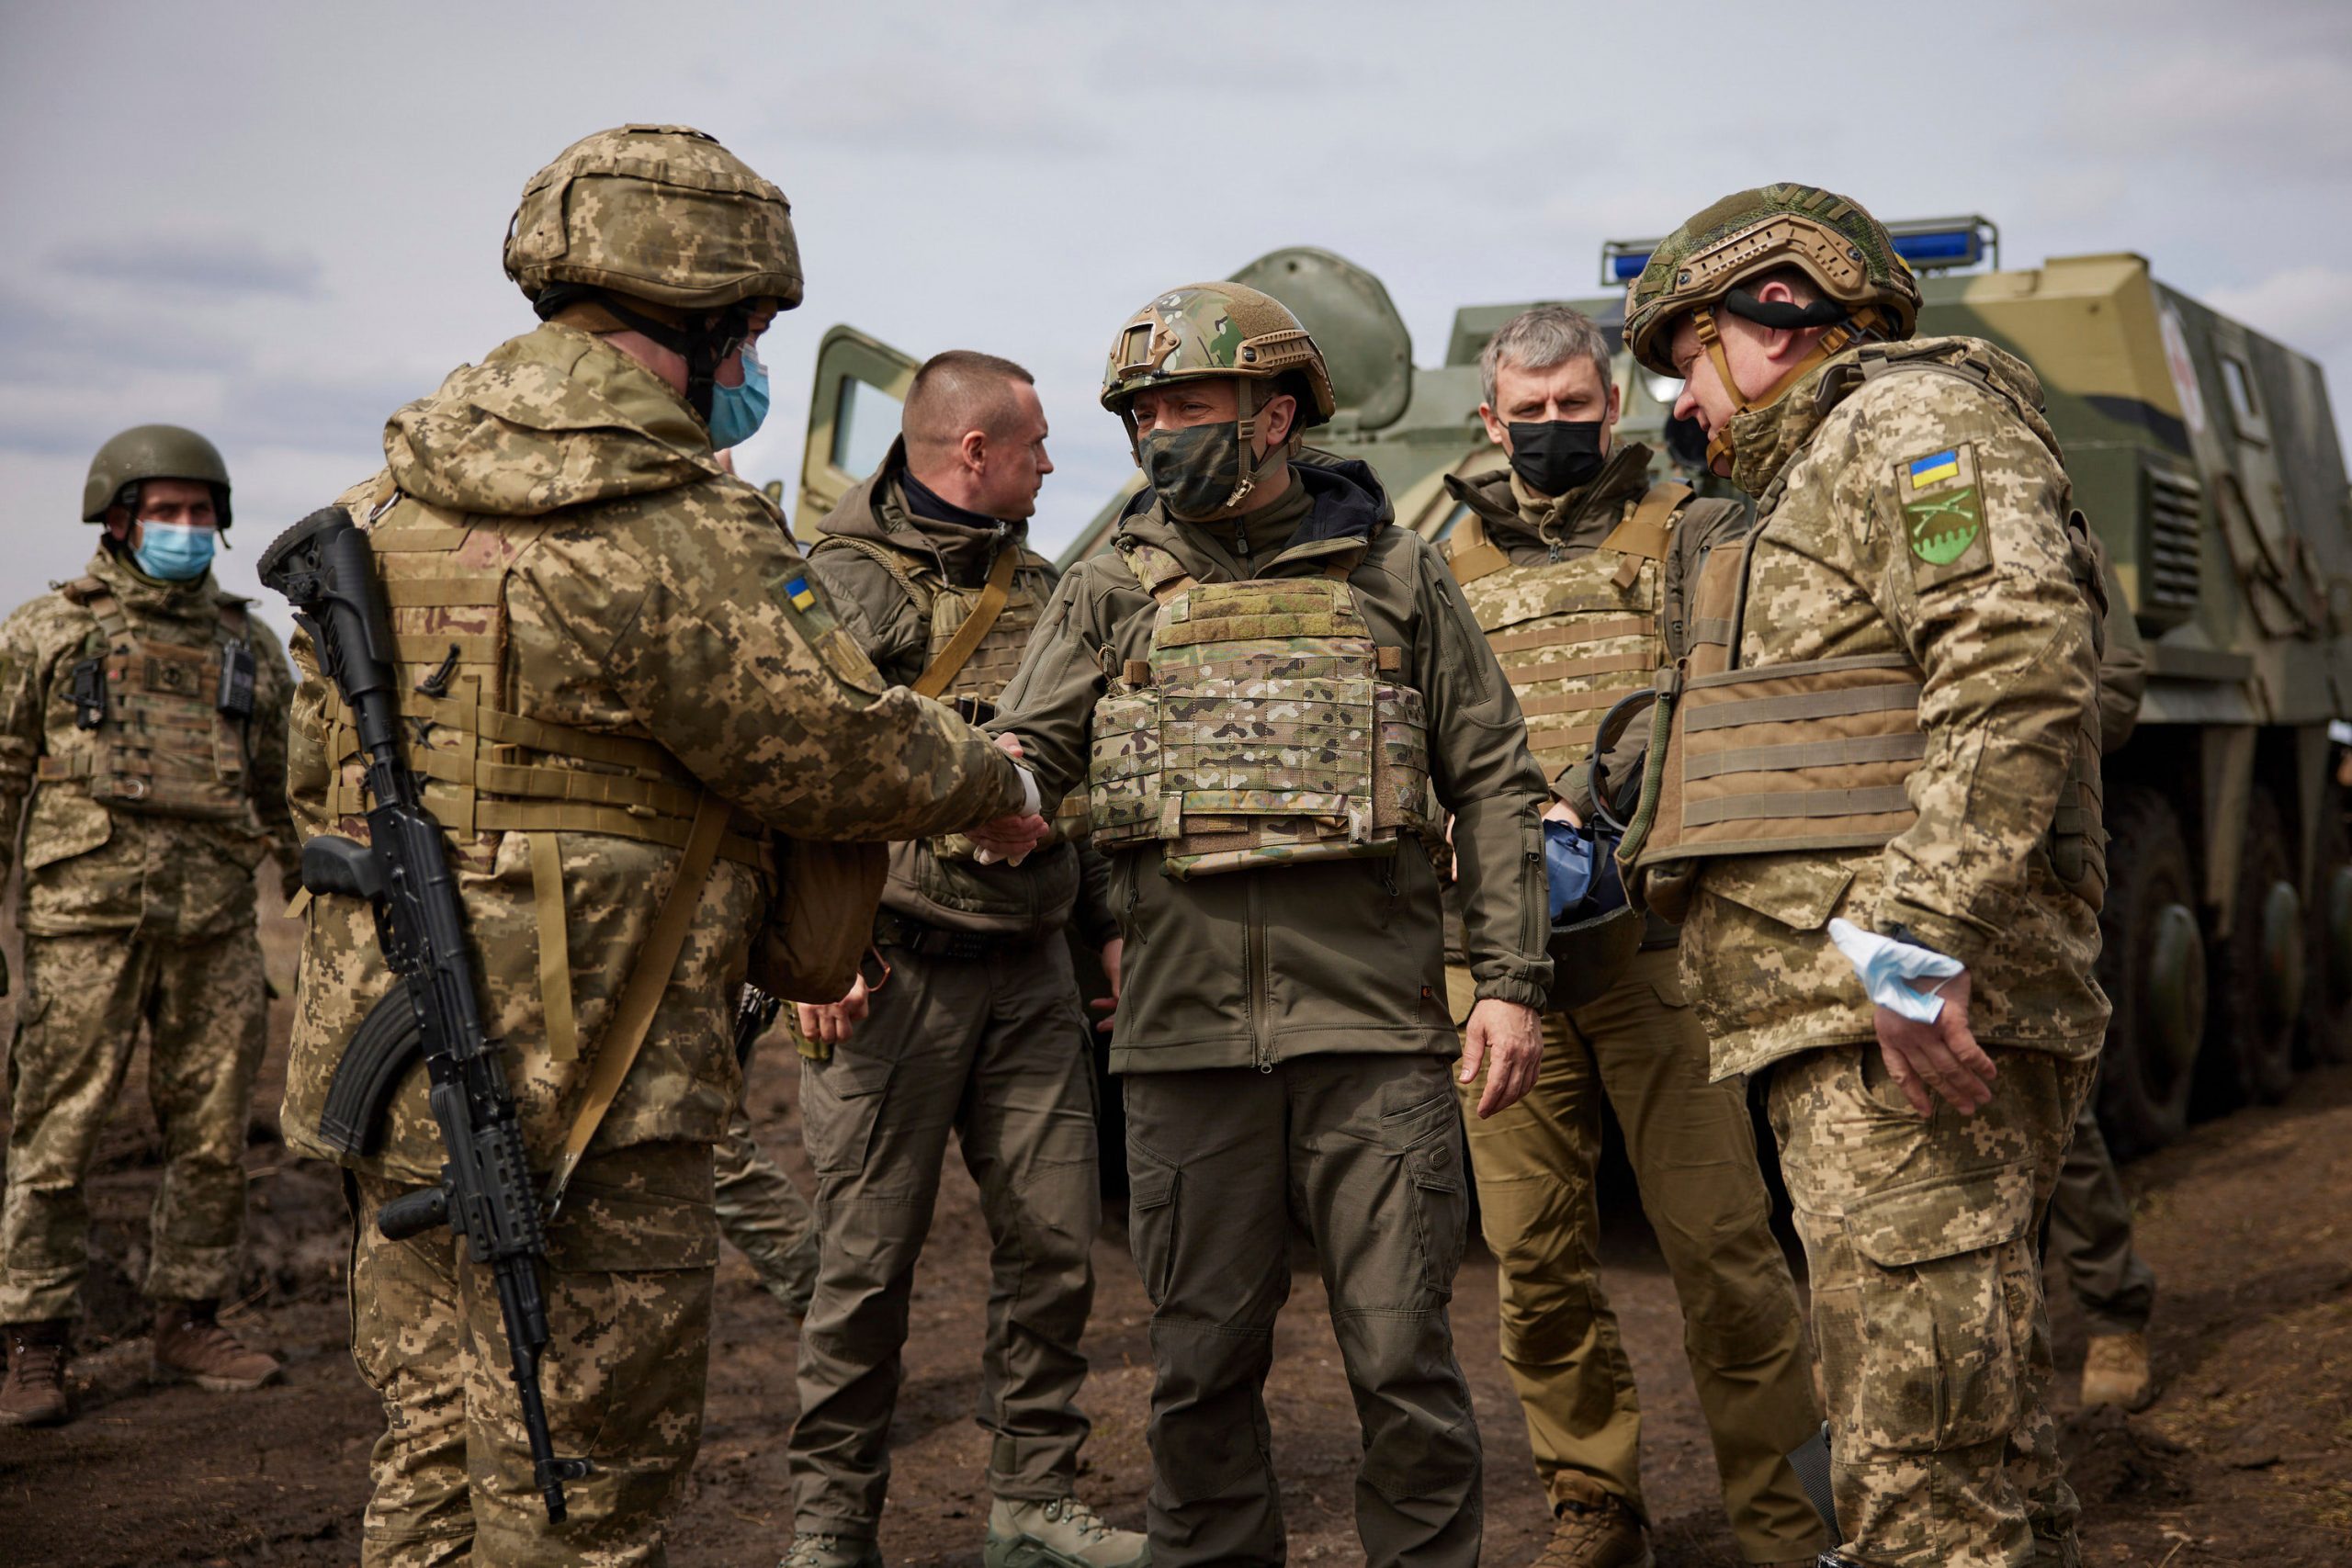 All you need to know about Donbas, eastern Ukraine’s breakaway region